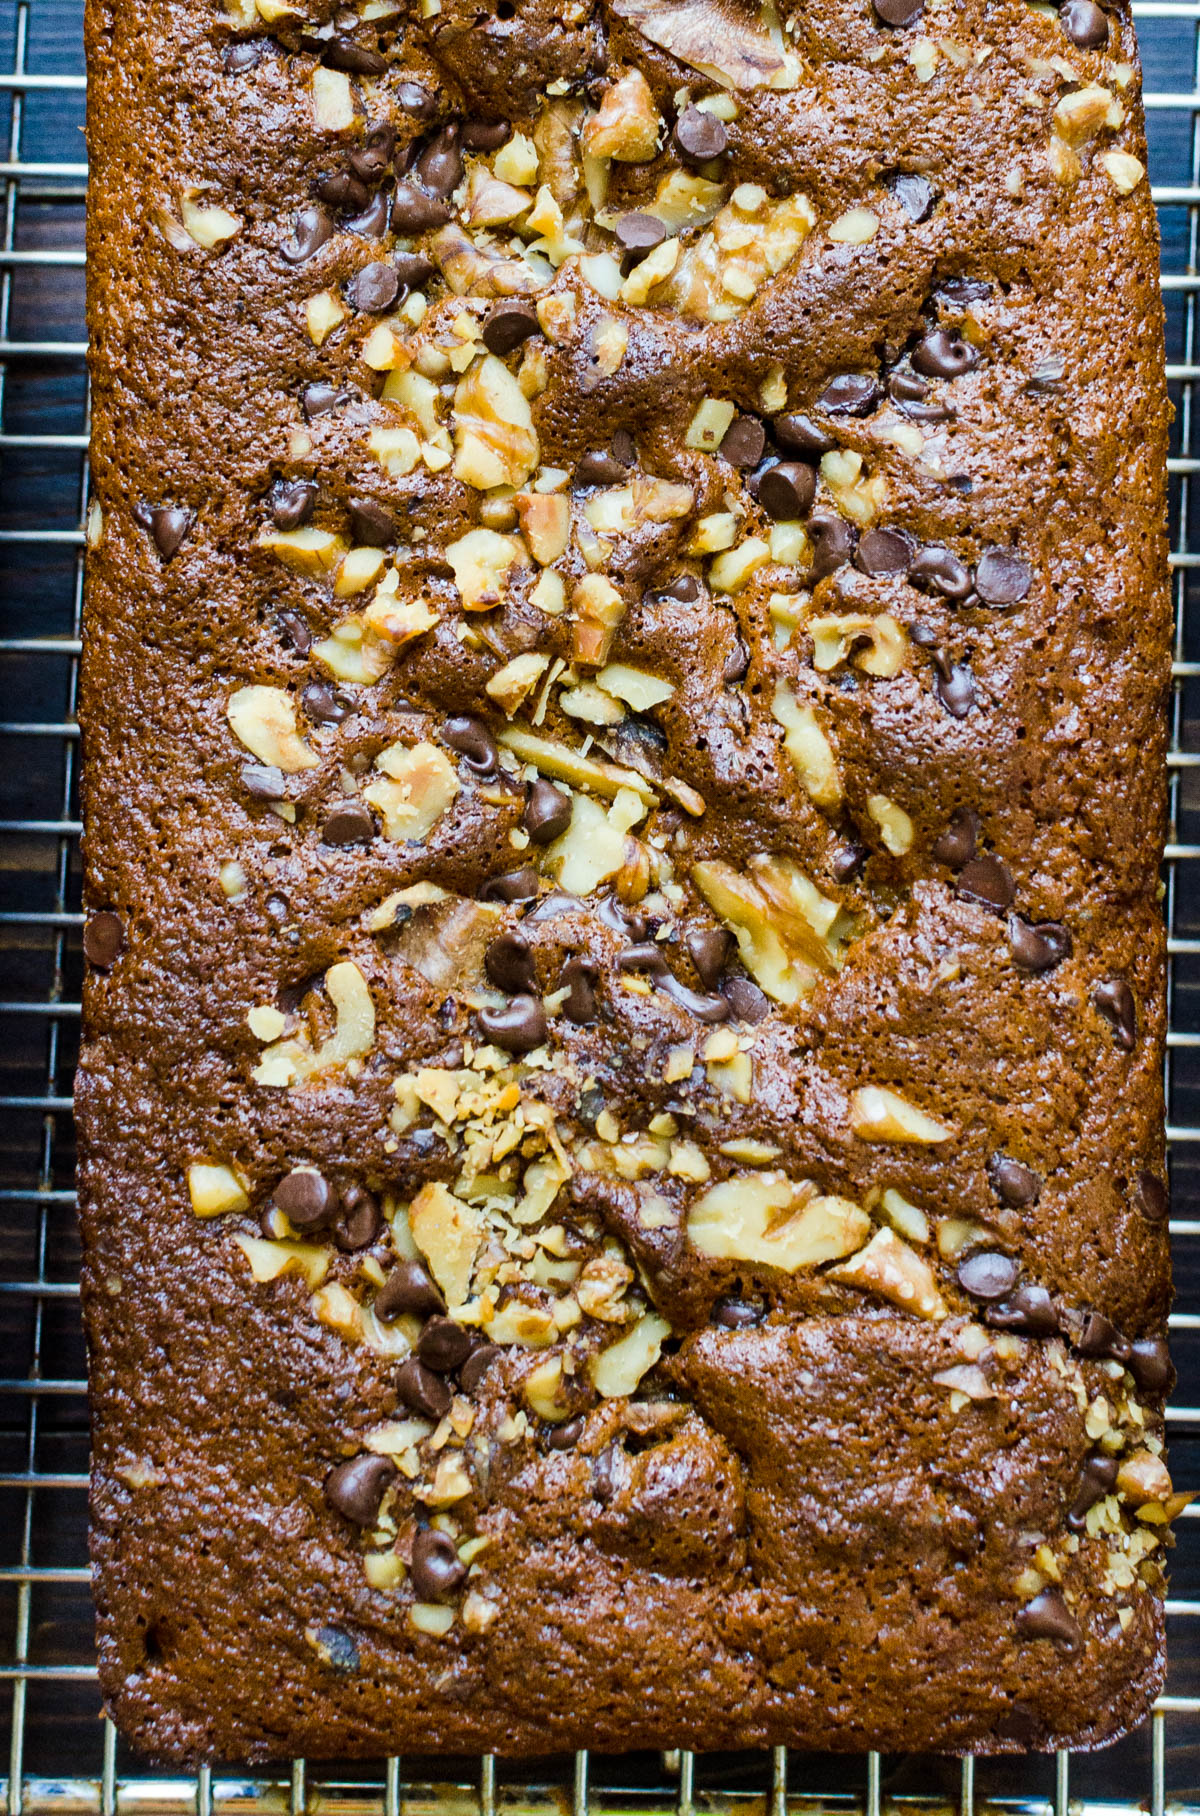 A loaf of baked banana bread with chocolate chips and walnuts cooling on a rack.